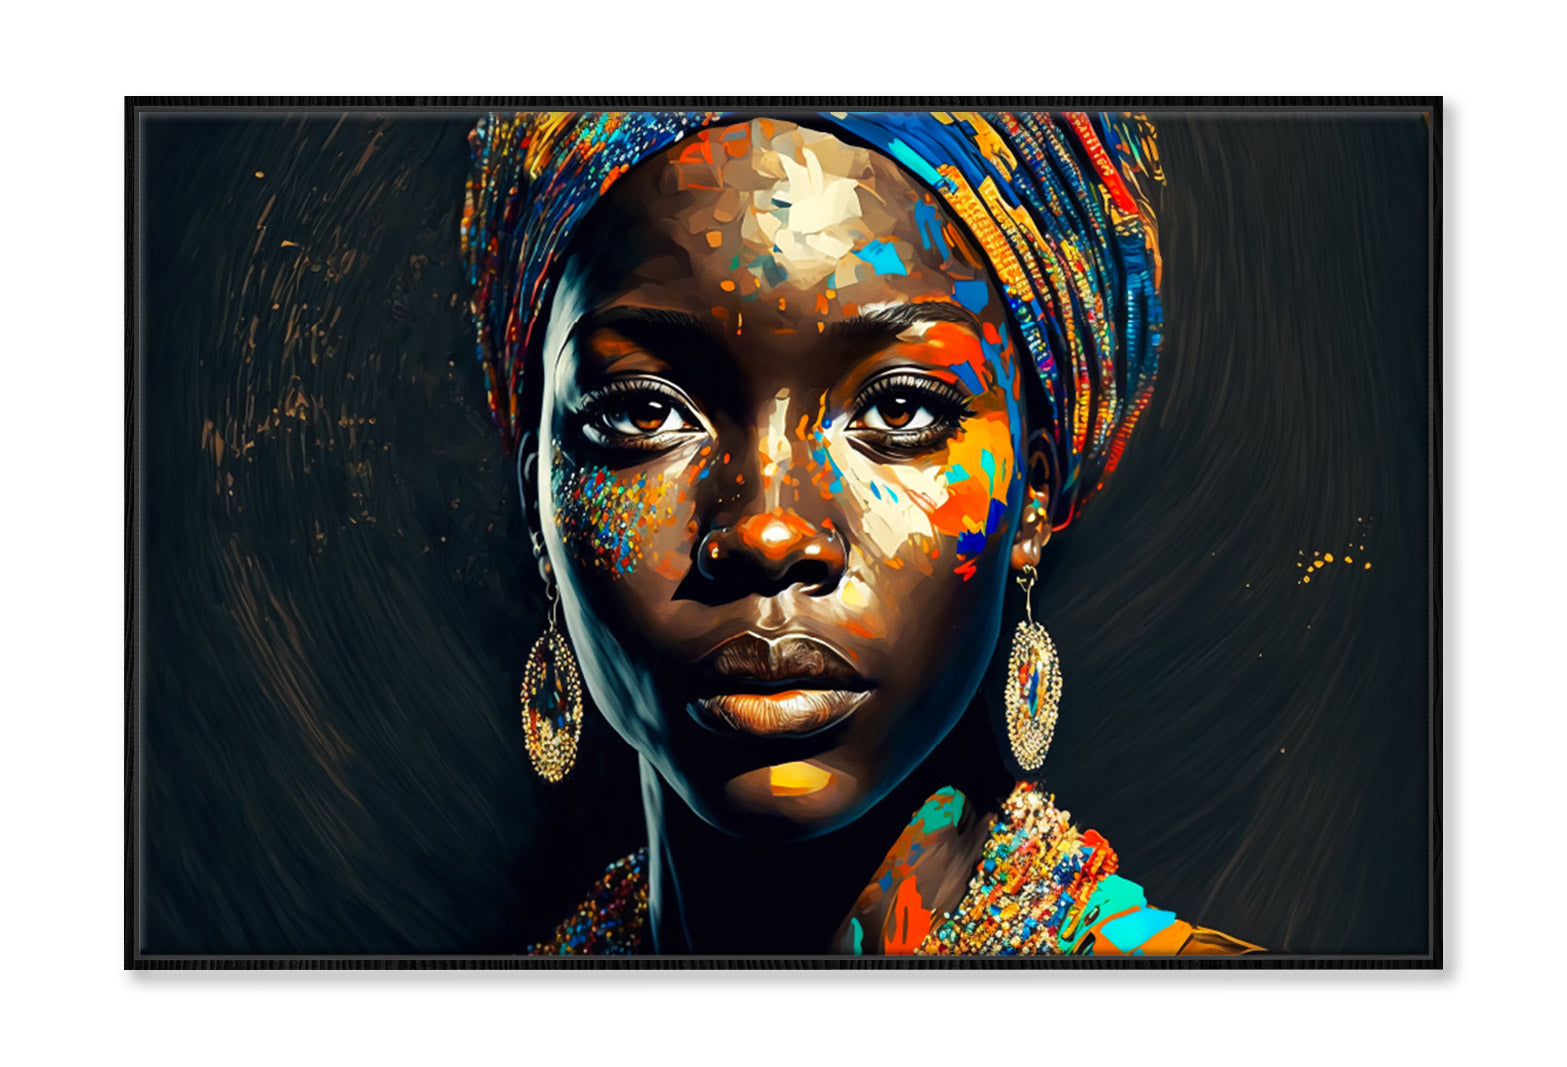 Black Woman with Modern Turban Oil Painting Wall Art Limited Edition High Quality Print Canvas Box Framed Black